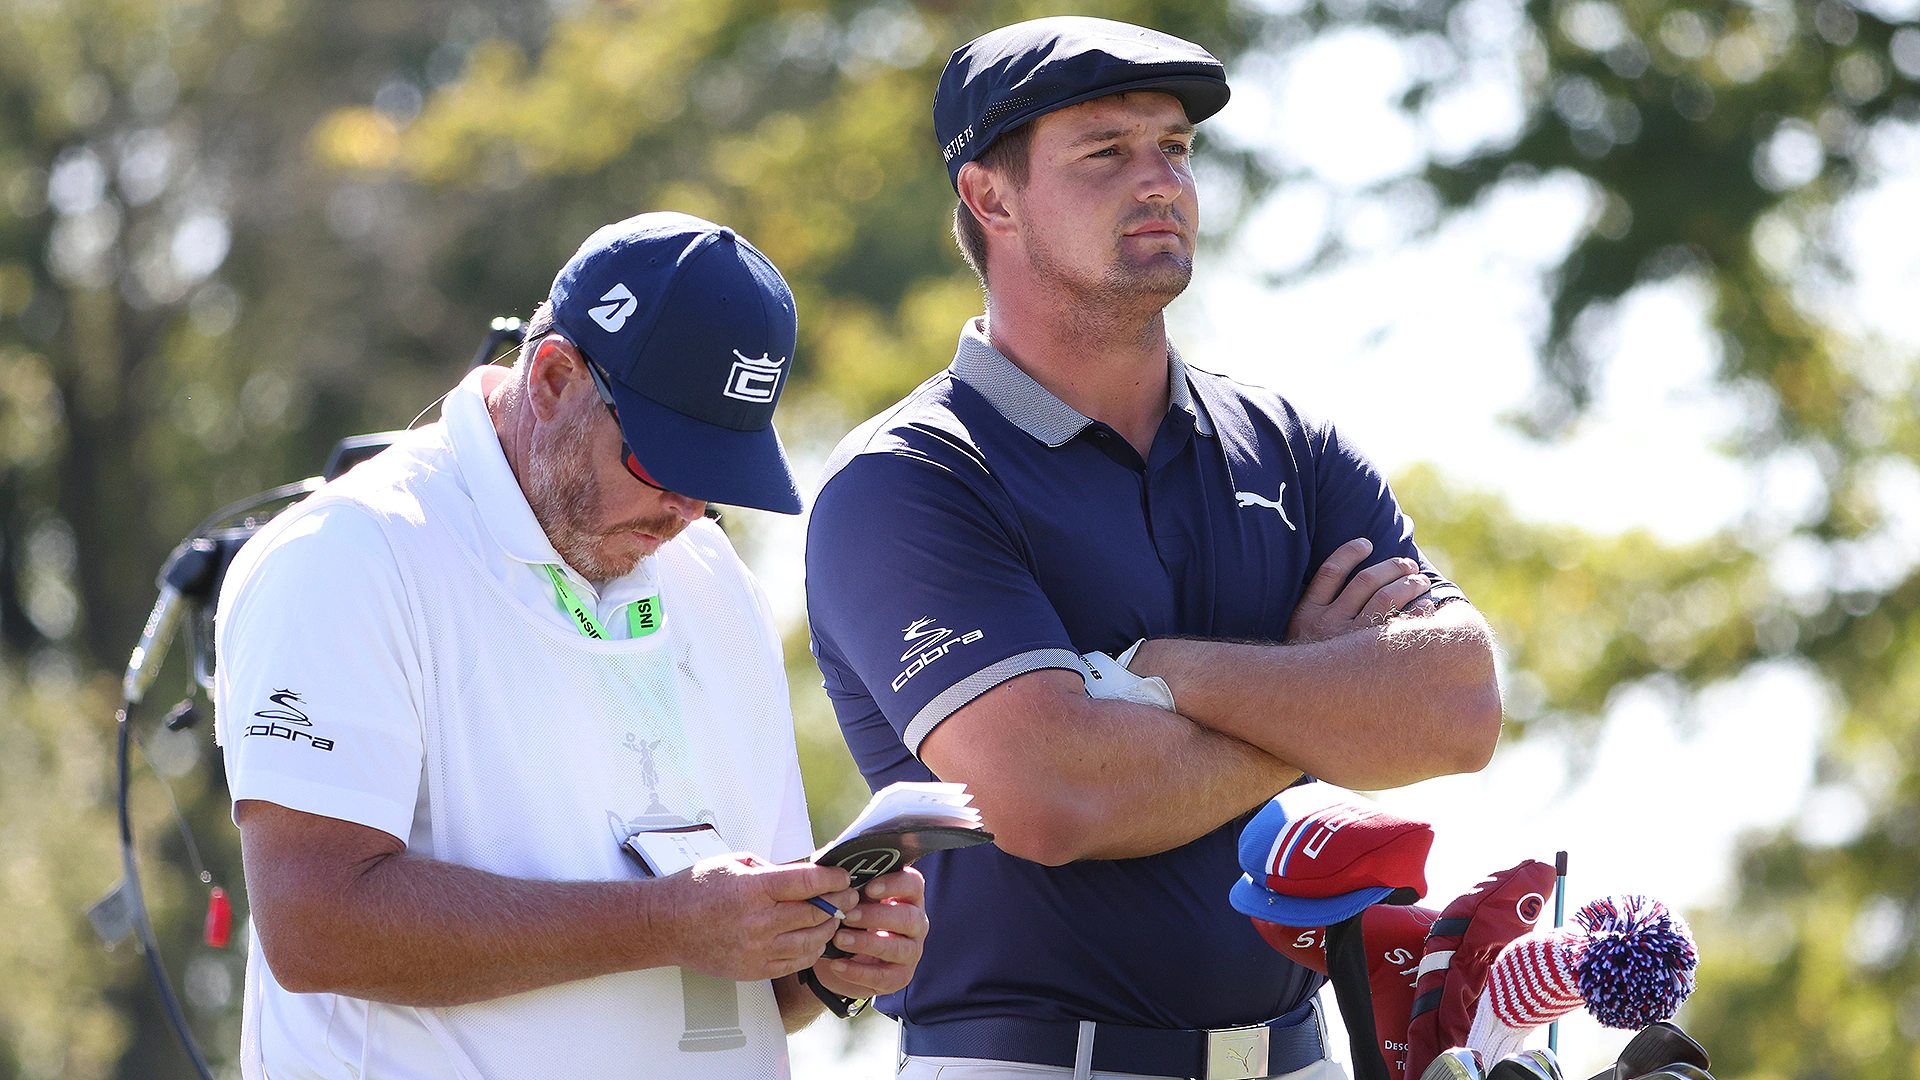 No fairways, no problem as Bryson DeChambeau continues to overpower Winged Foot